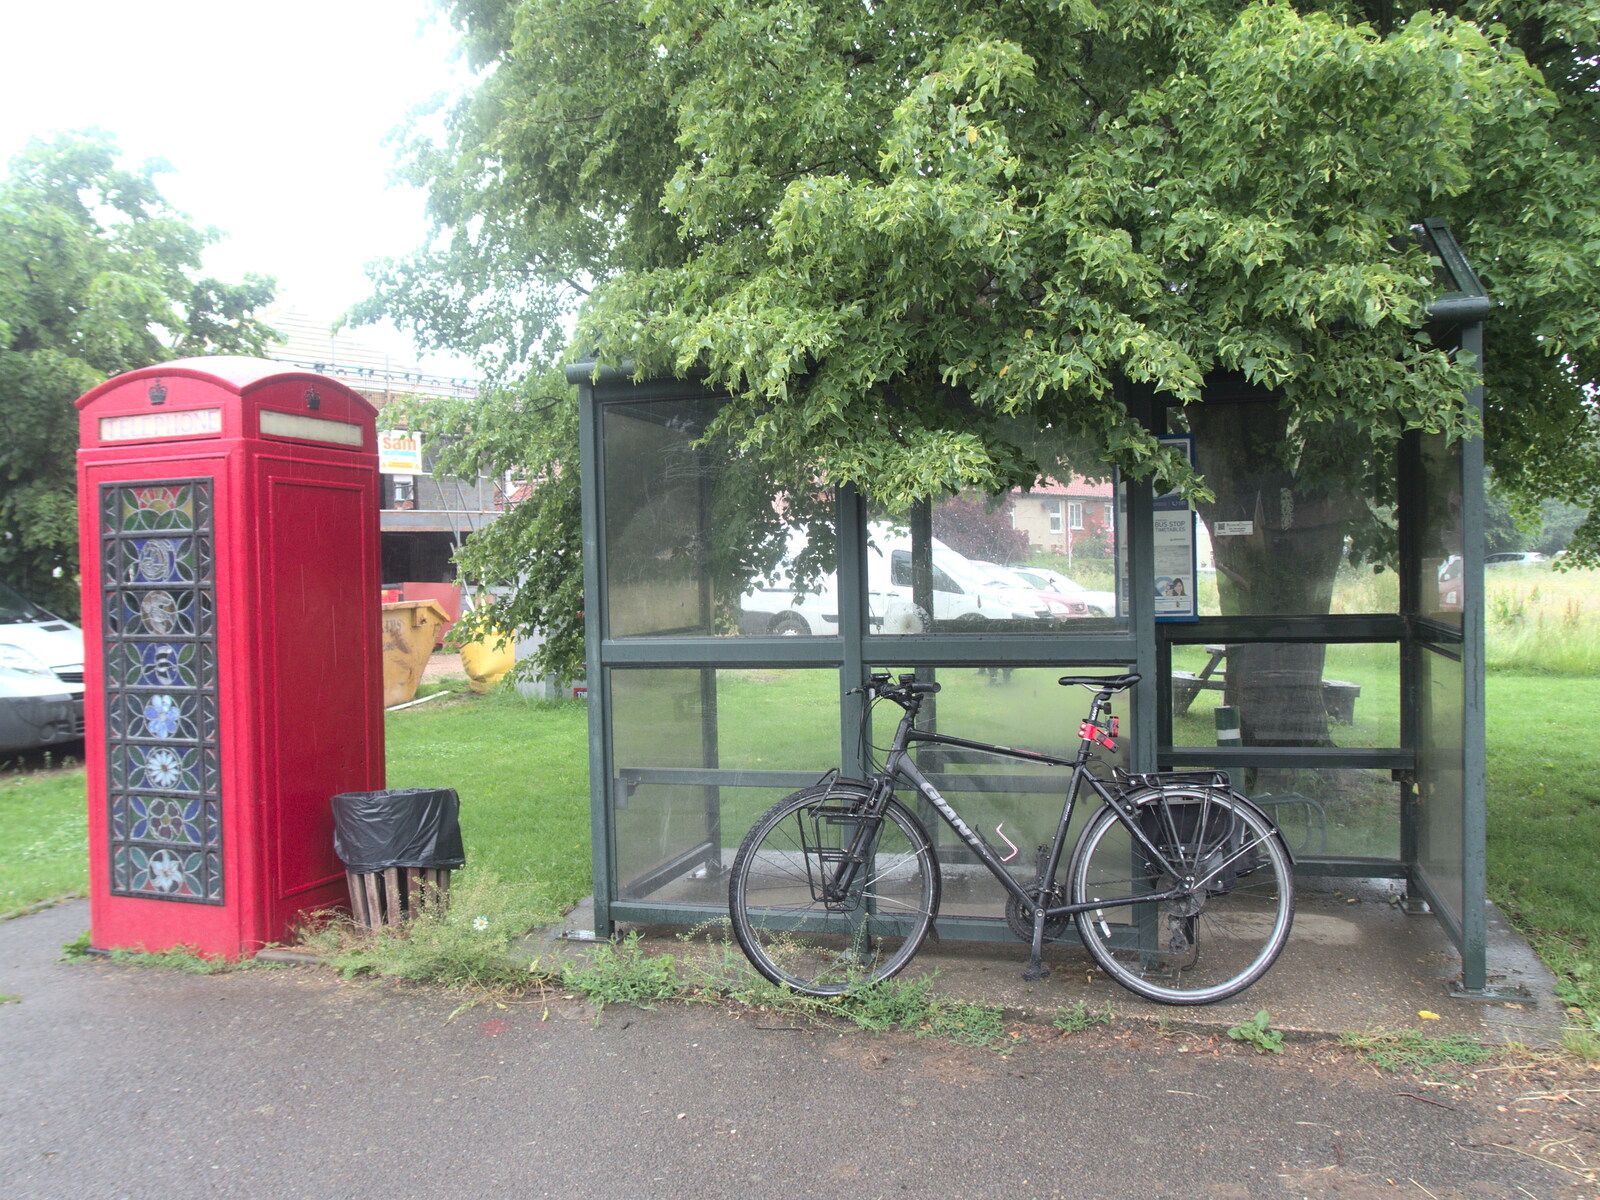 Nosher's bike by the bus shelter from A BSCC Ride to Pulham Market, Norfolk - 17th June 2021